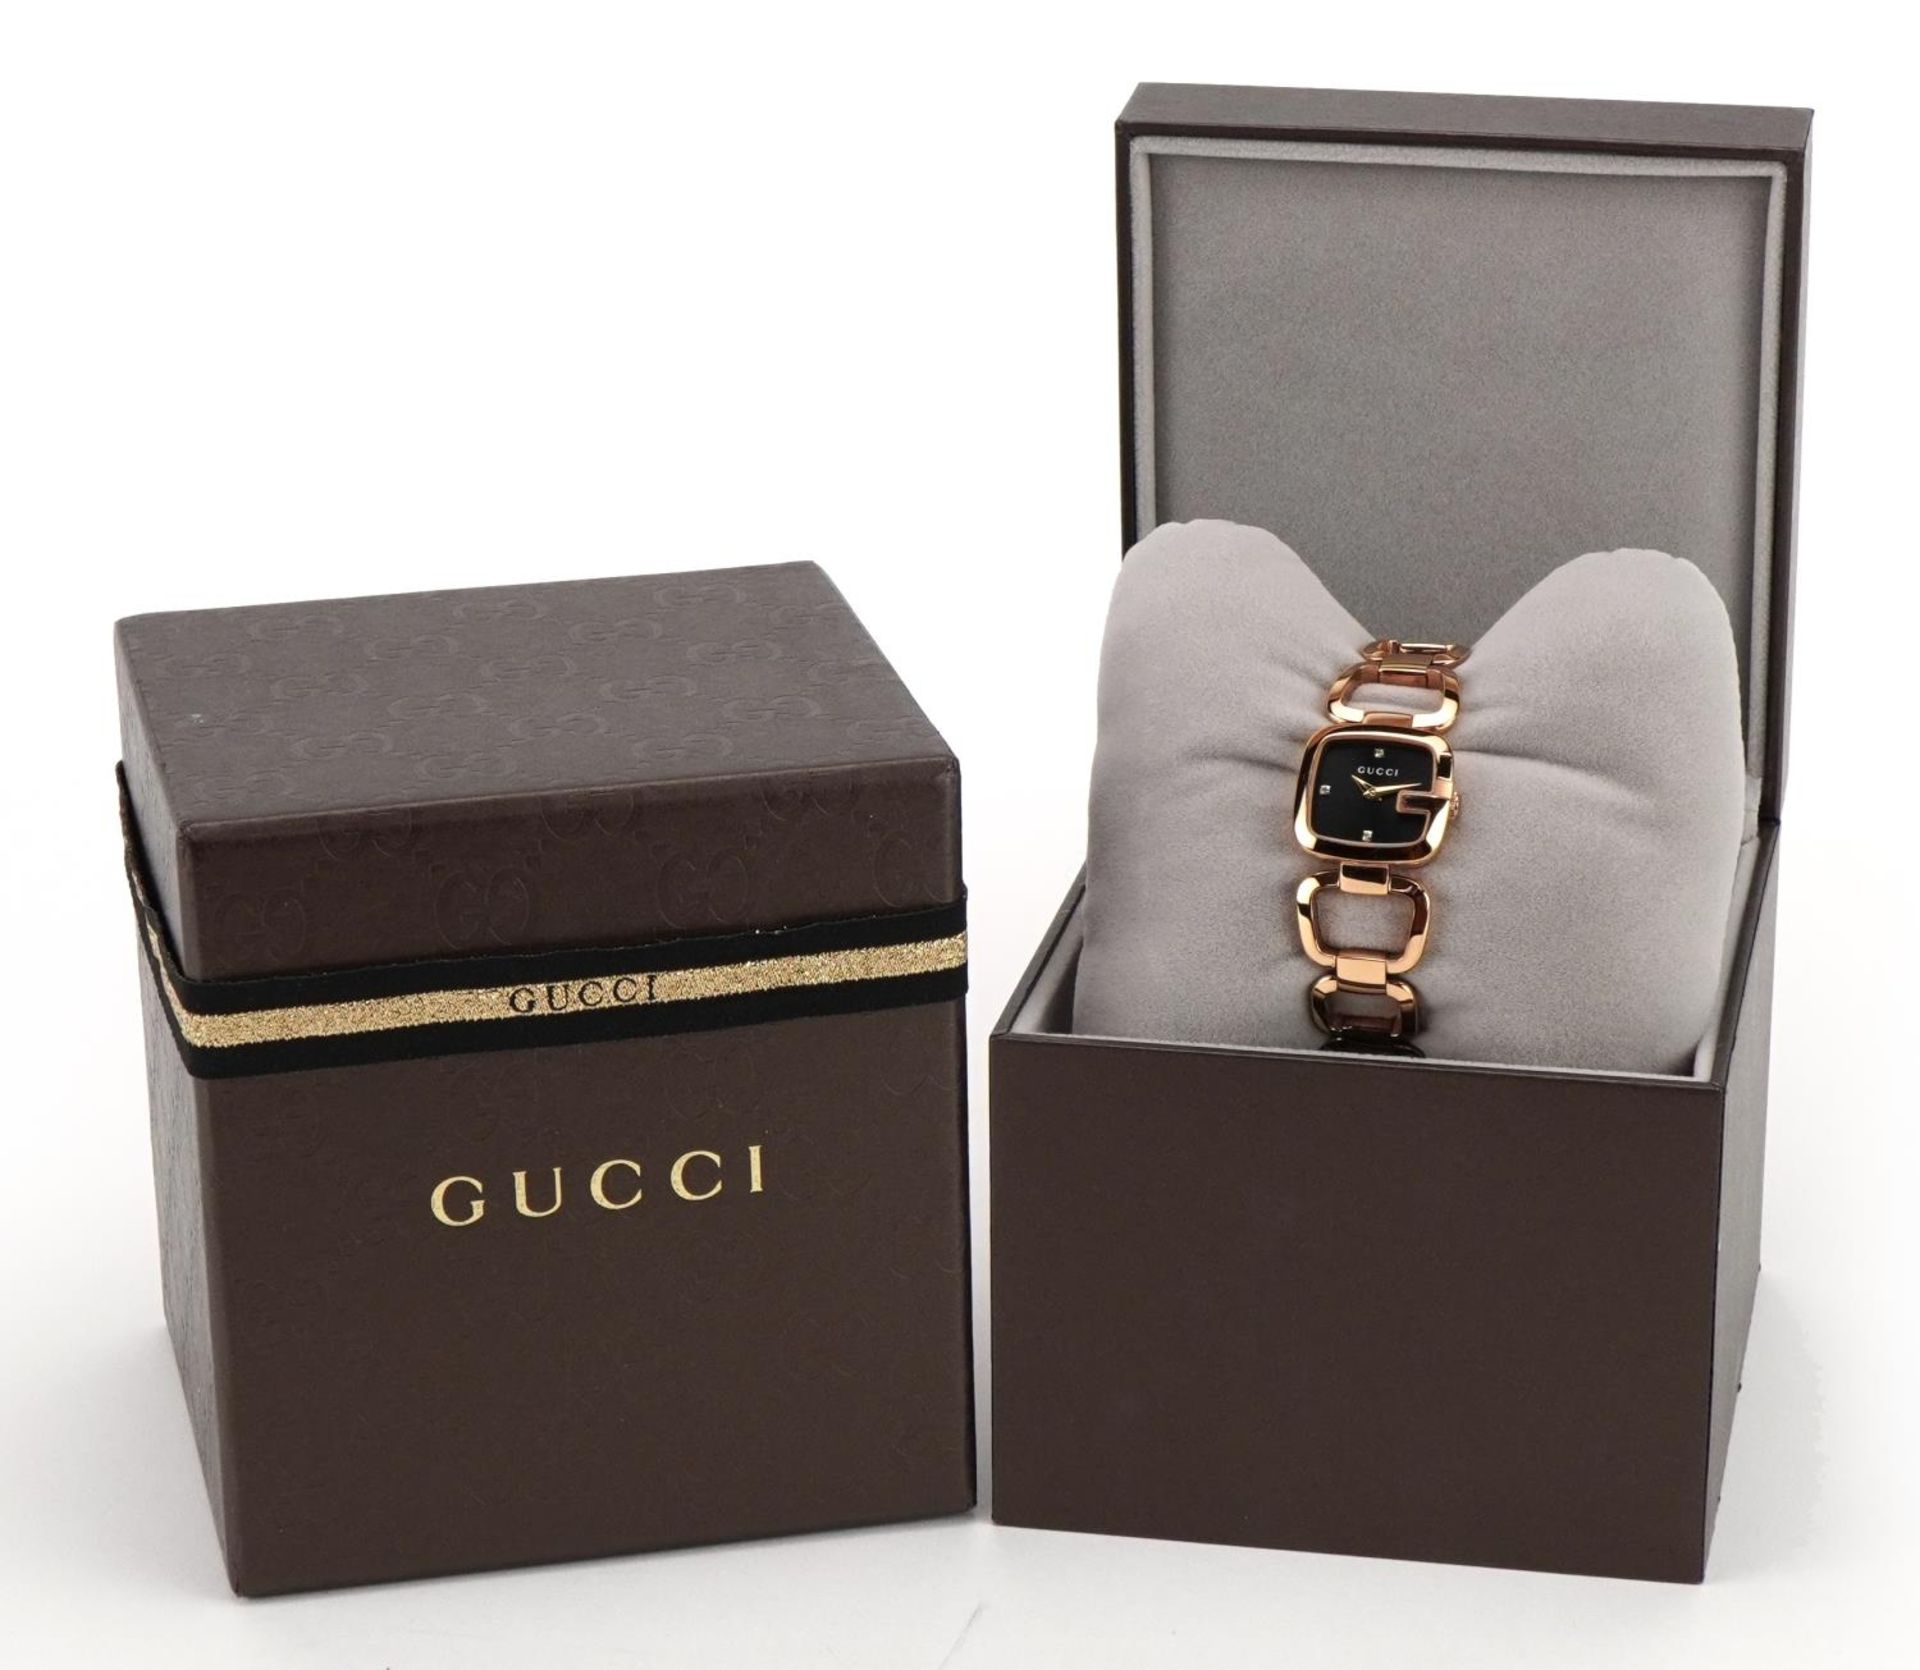 Gucci, ladies Gucci Dial G wristwatch numbered 125.5 with spare link and box, the case 24mm wide - Image 7 of 8